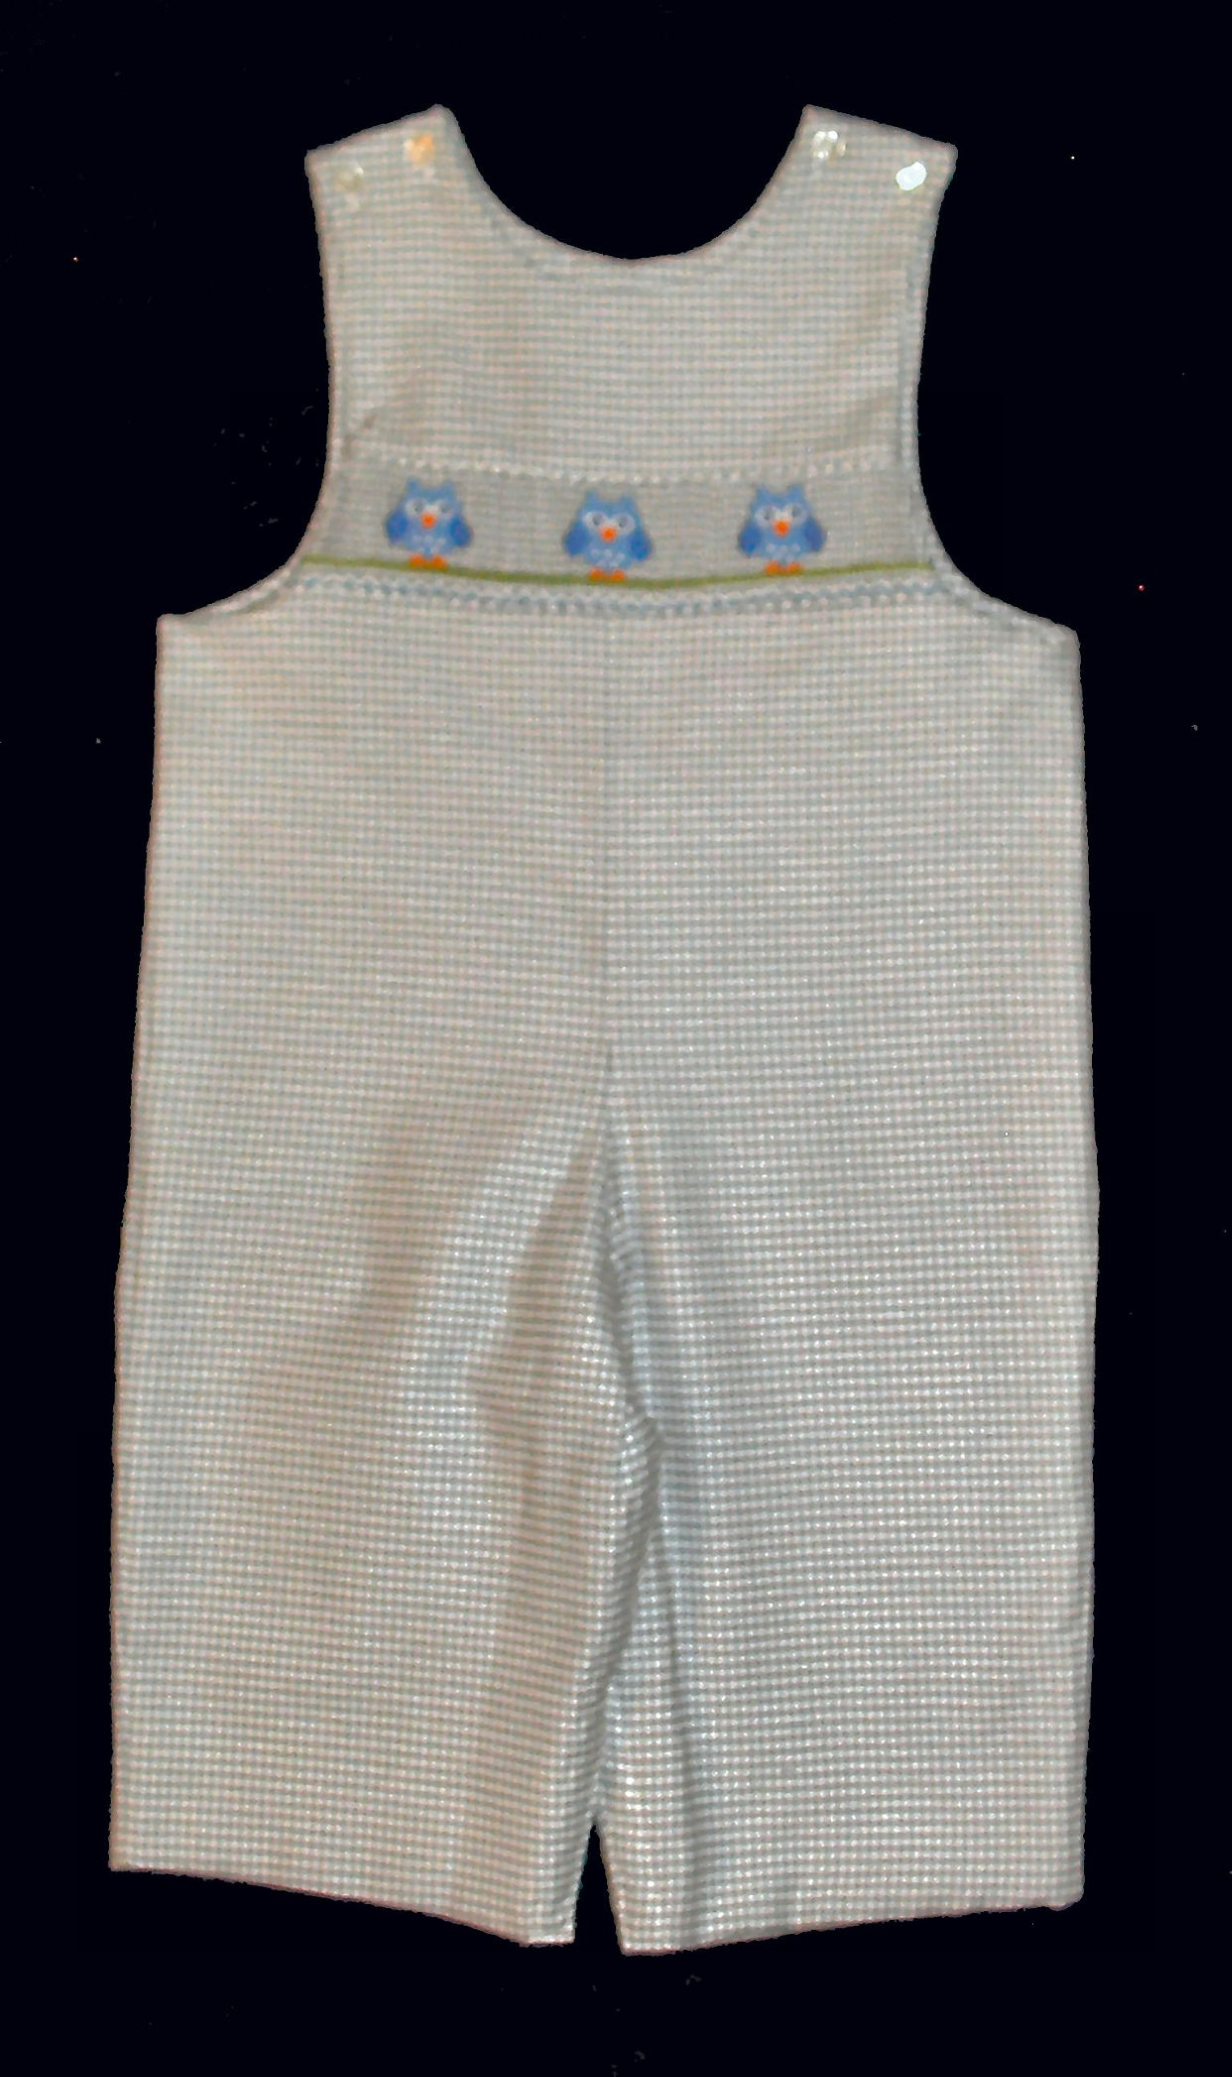 Three _ Blue _ Owls_ Boys Romper _ Picture Smocking FREE Shipping